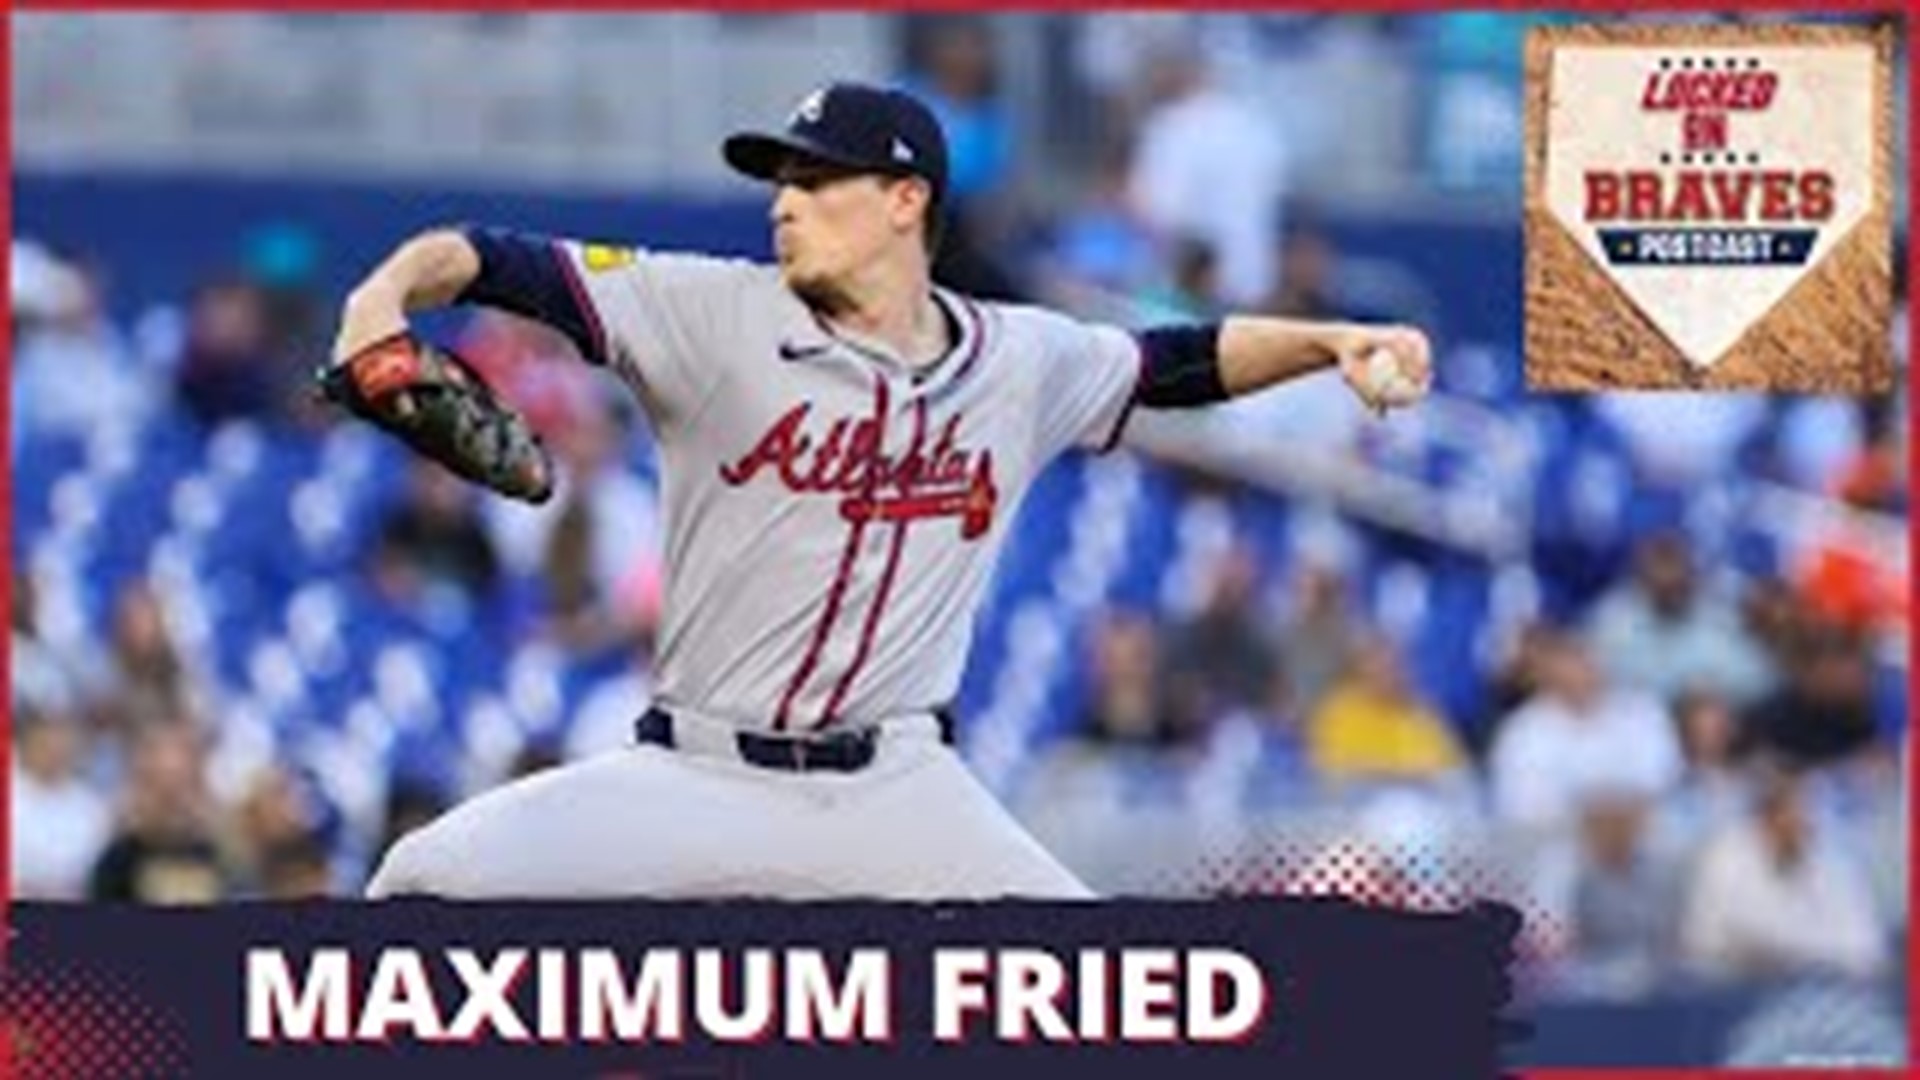 Max Fried was dialed in and the offense stayed busy in the Atlanta Braves' 8-1 victory over the Miami Marlins on Friday night at LoanDepot Park.